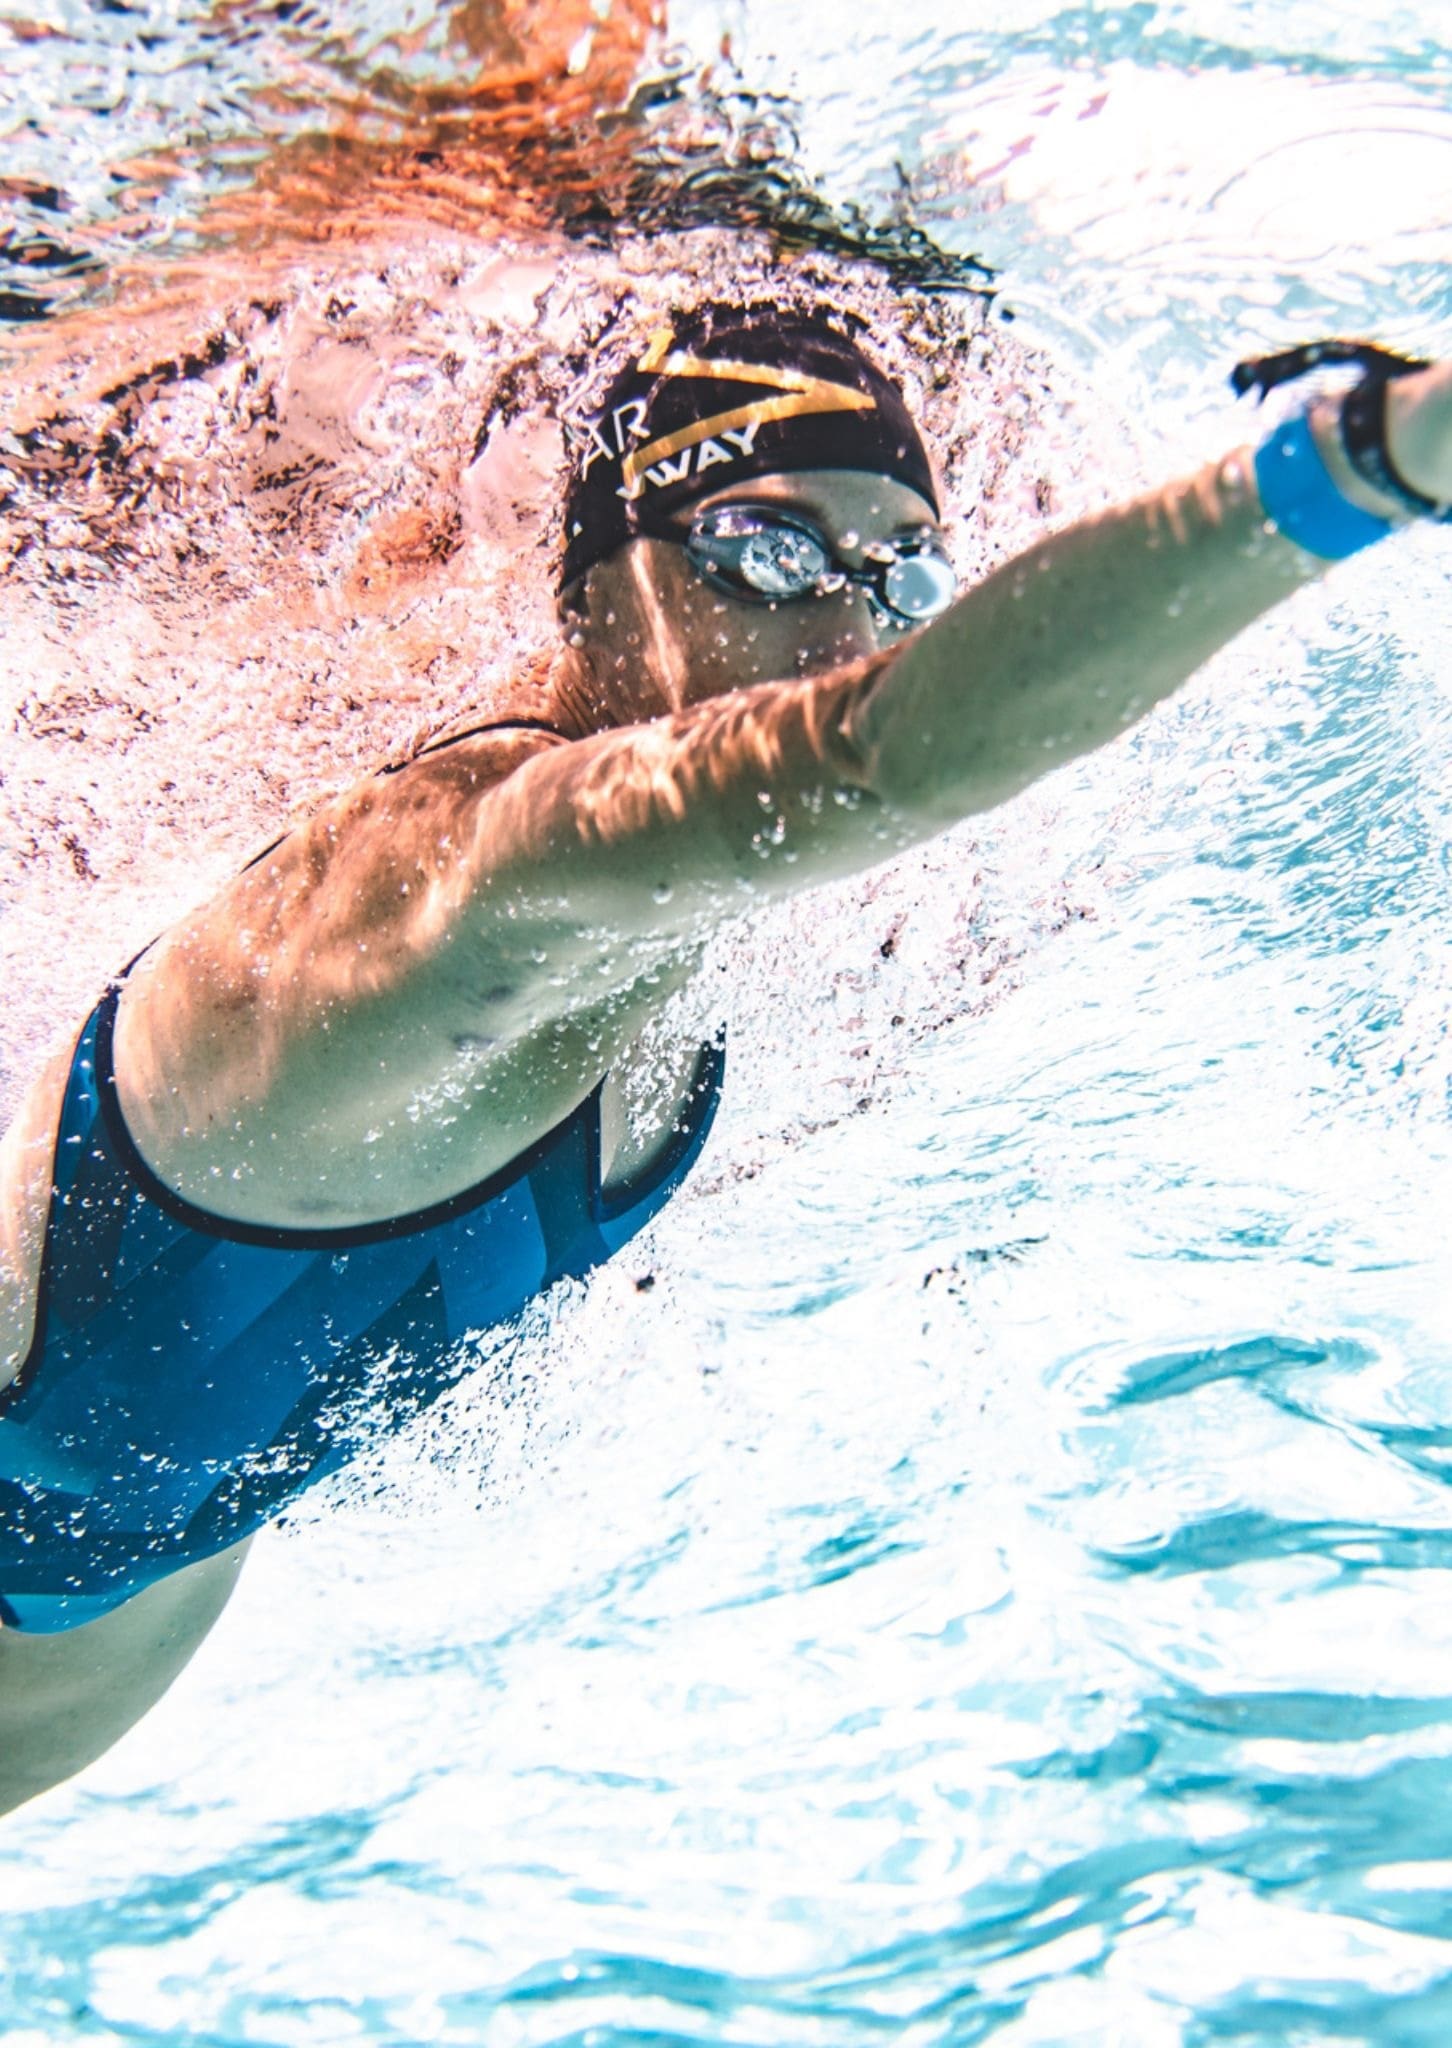 Power Woman launches new swimsuit collection in collaboration with Olympic medalist Lisa Nordén